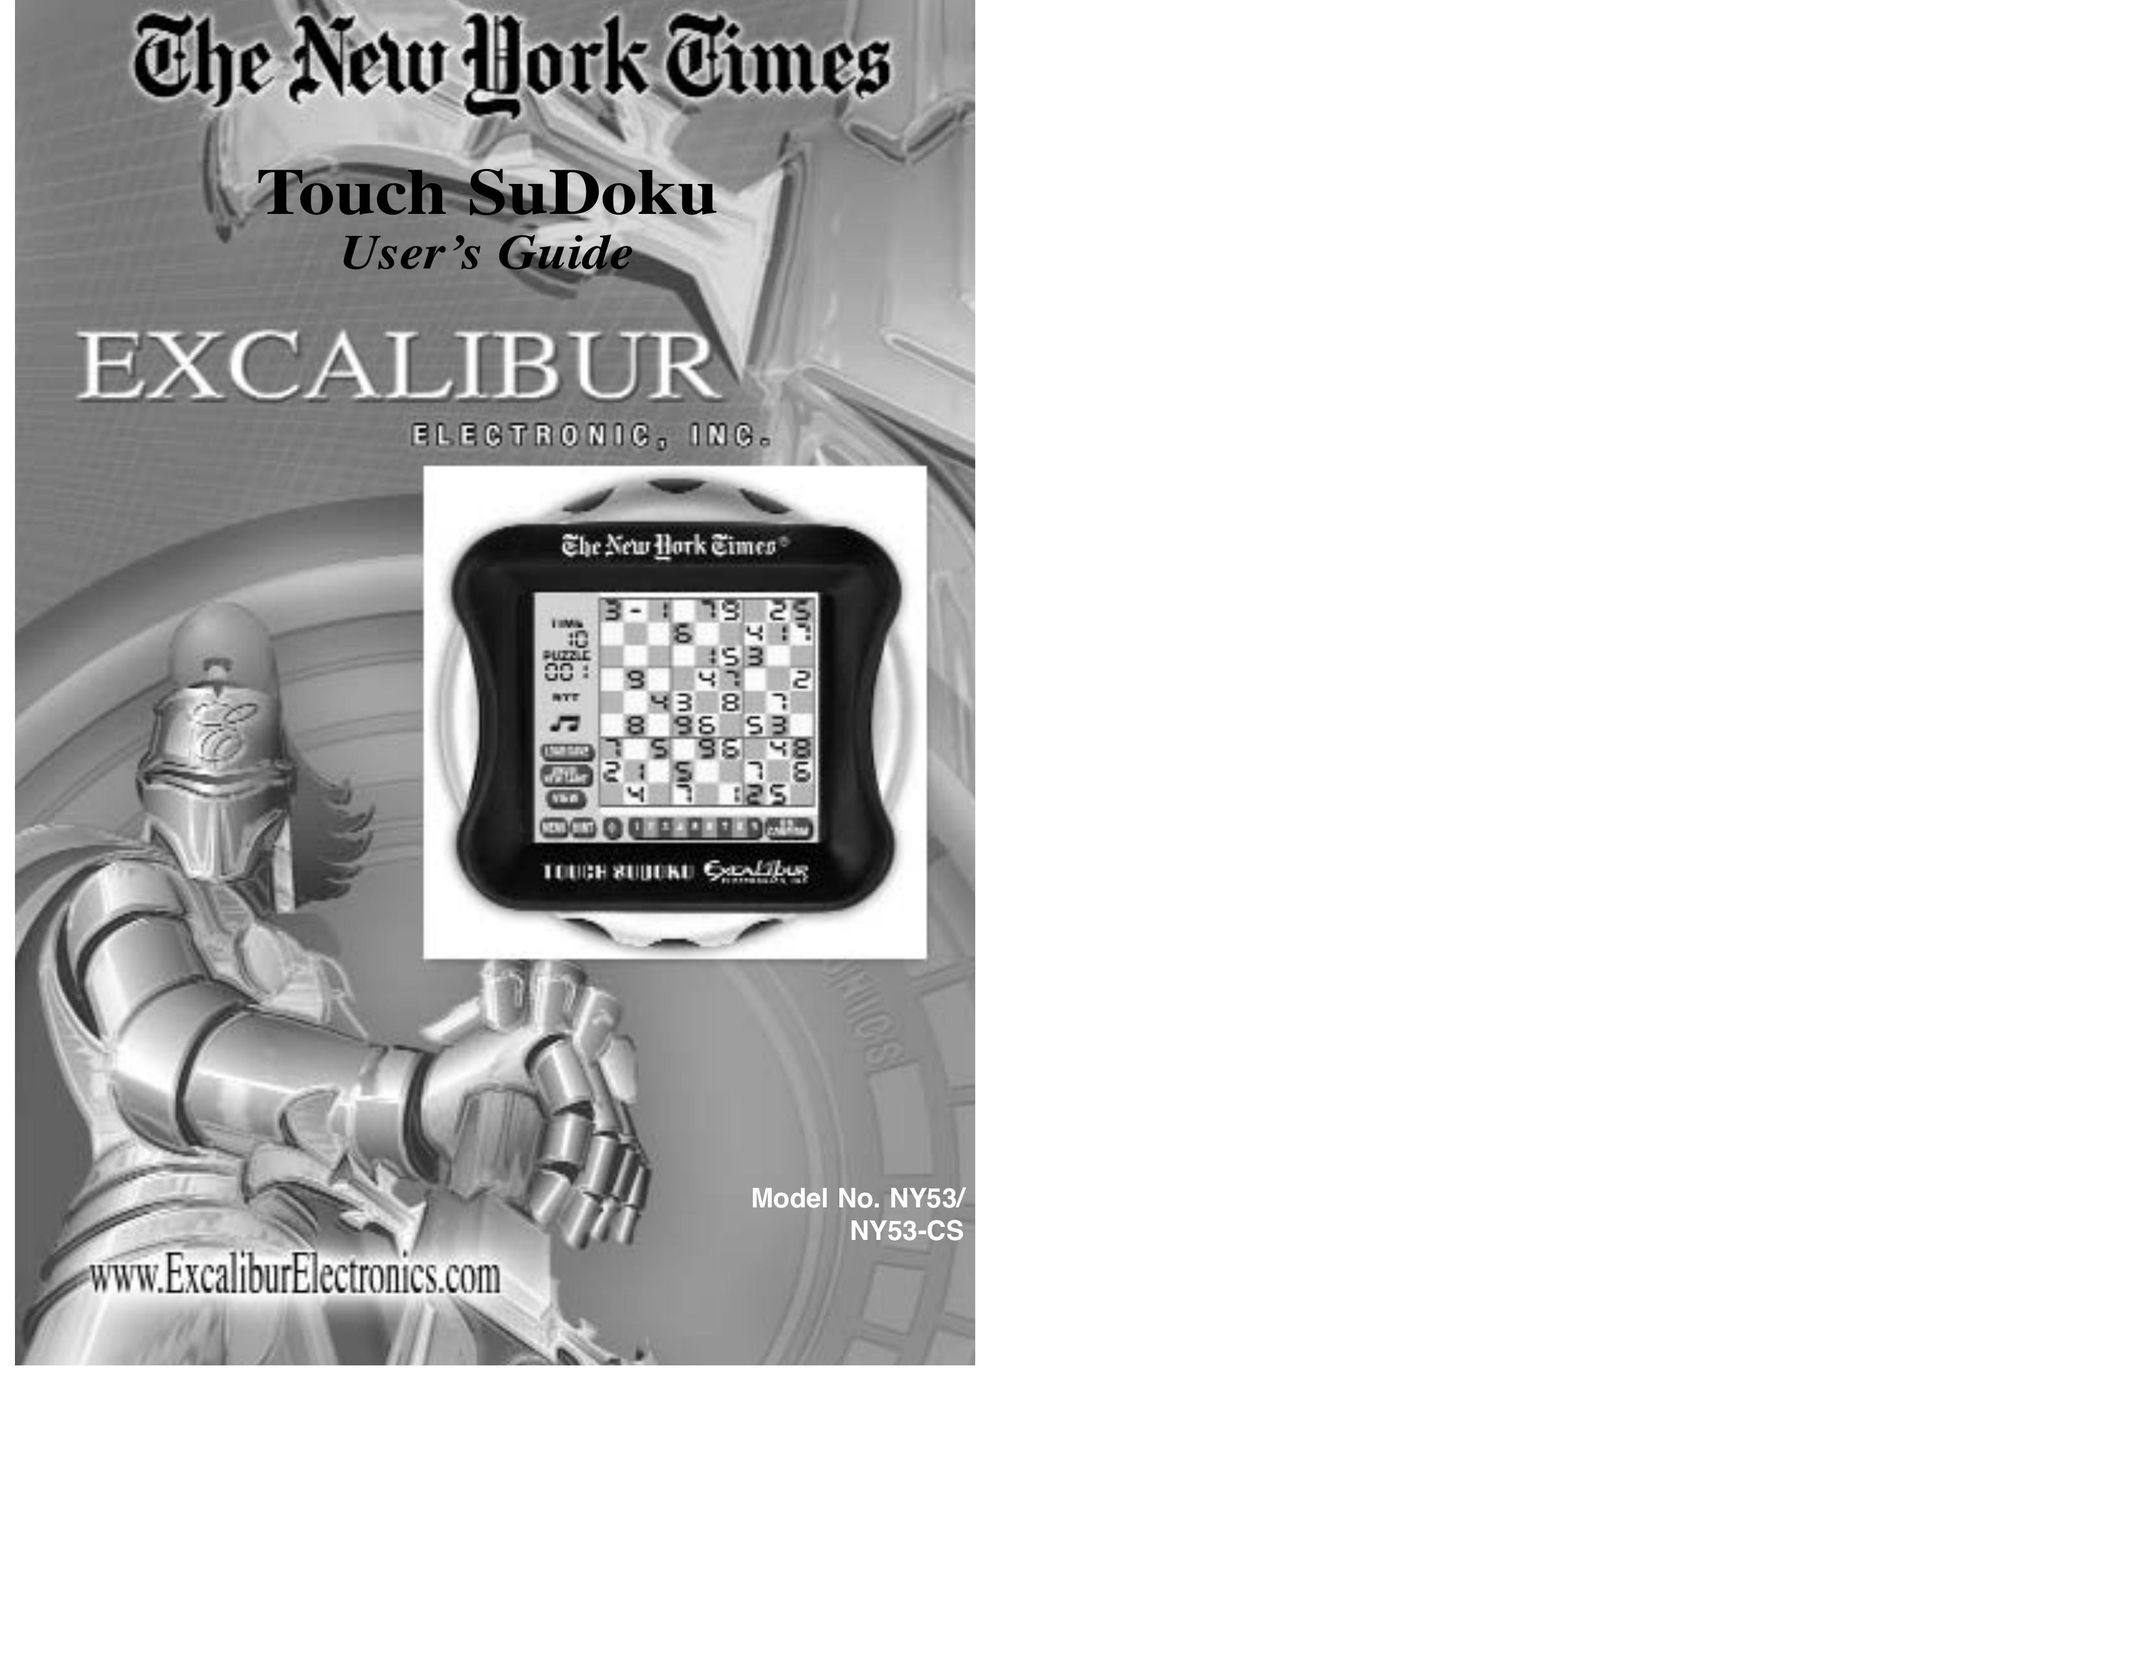 Excalibur electronic NY53-CS Games User Manual